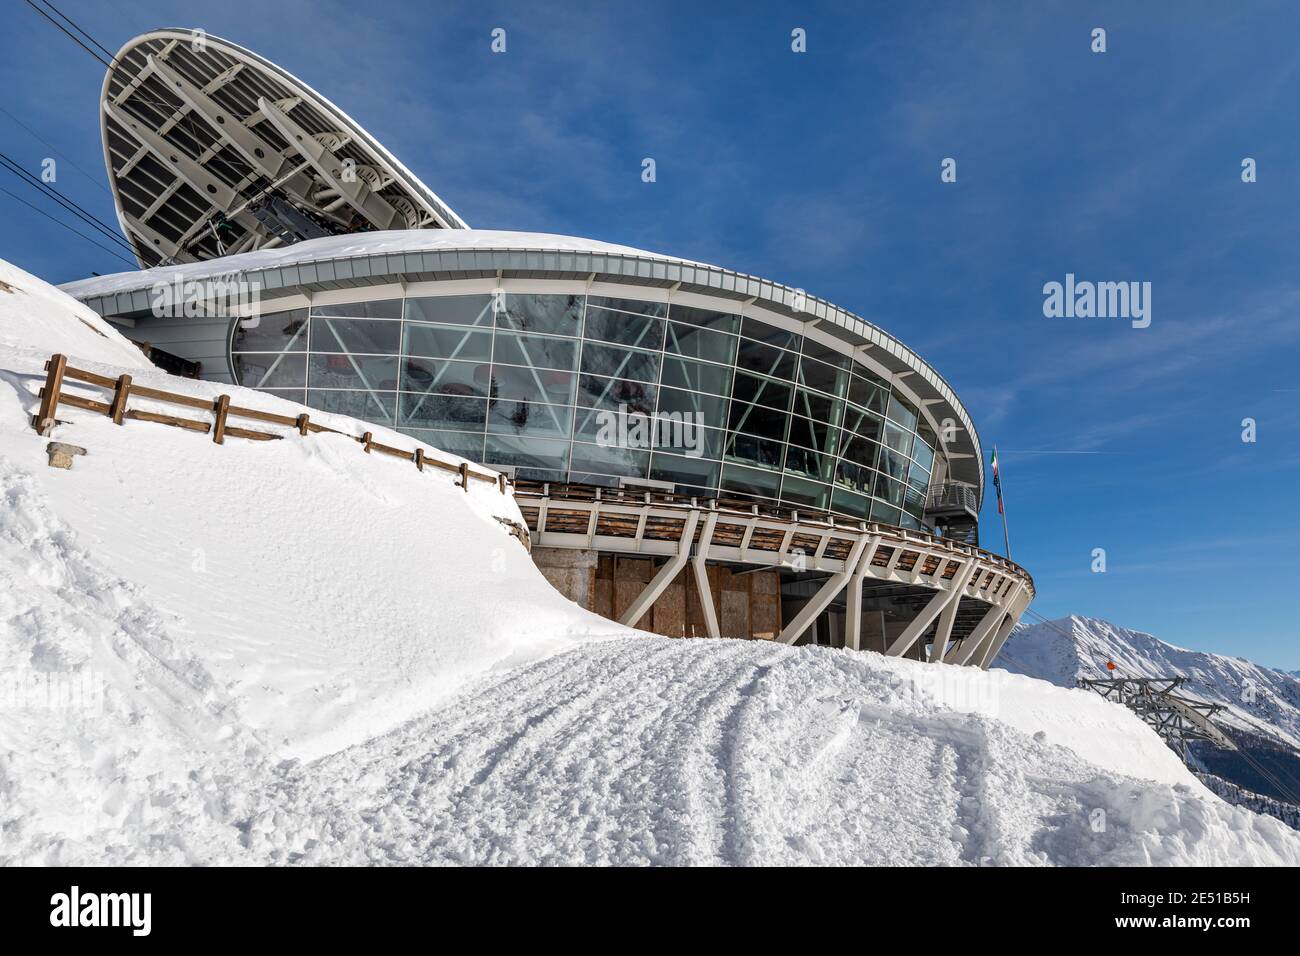 Wide angle view of the middle ropeway station on the Italian side of Mont Blanc, surrounded by snow under a blue sky with sparse clouds Stock Photo